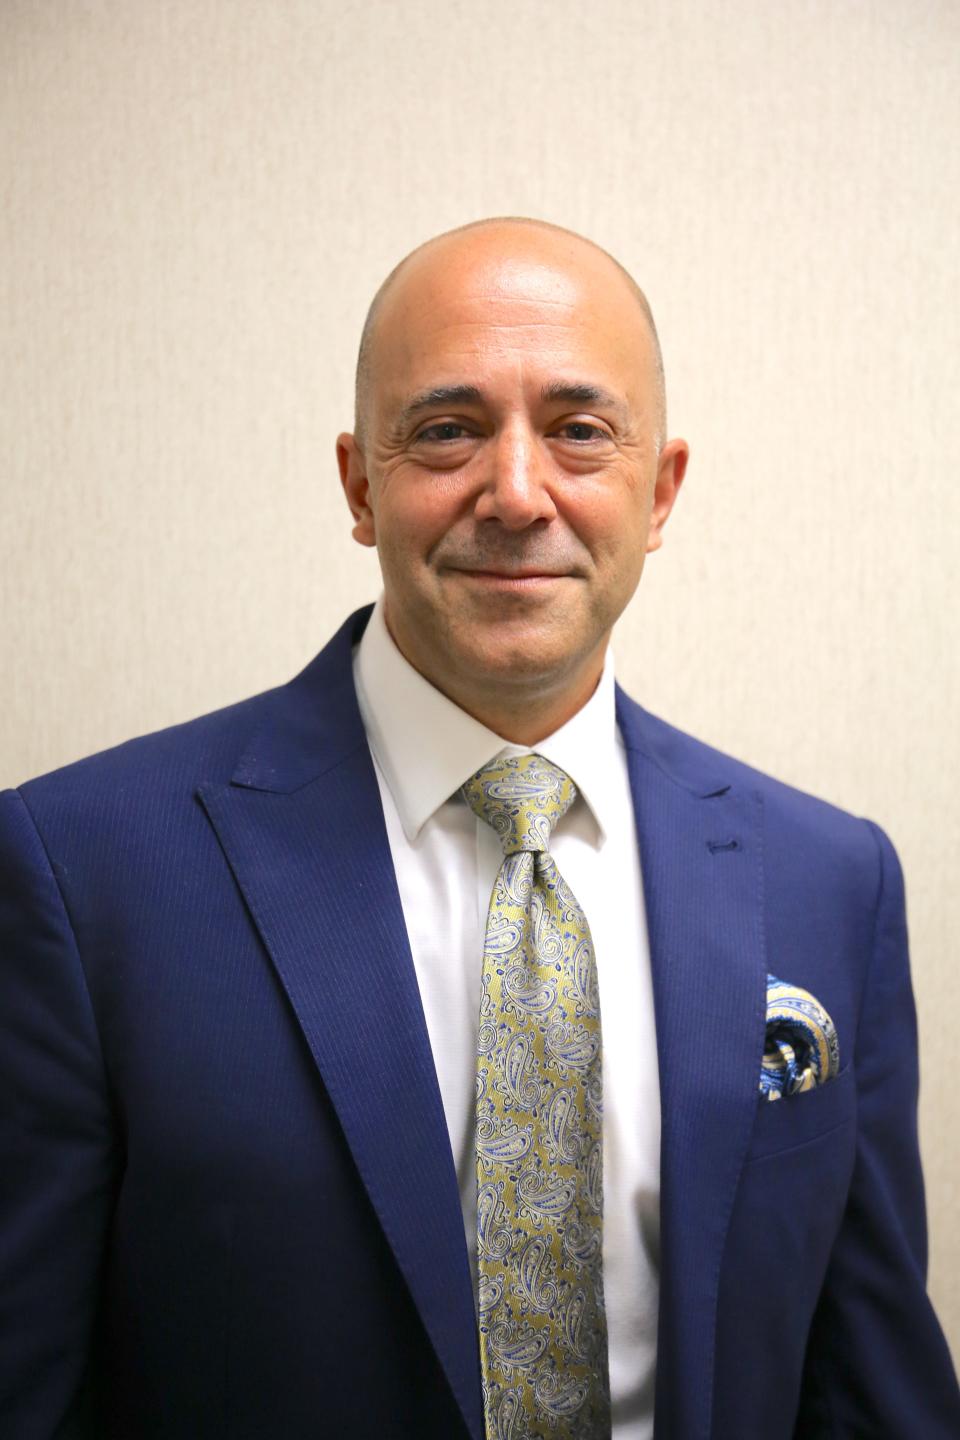 Edward Aldarelli has been appointed as Superintendent by the Board of Education at Thursday's meeting.